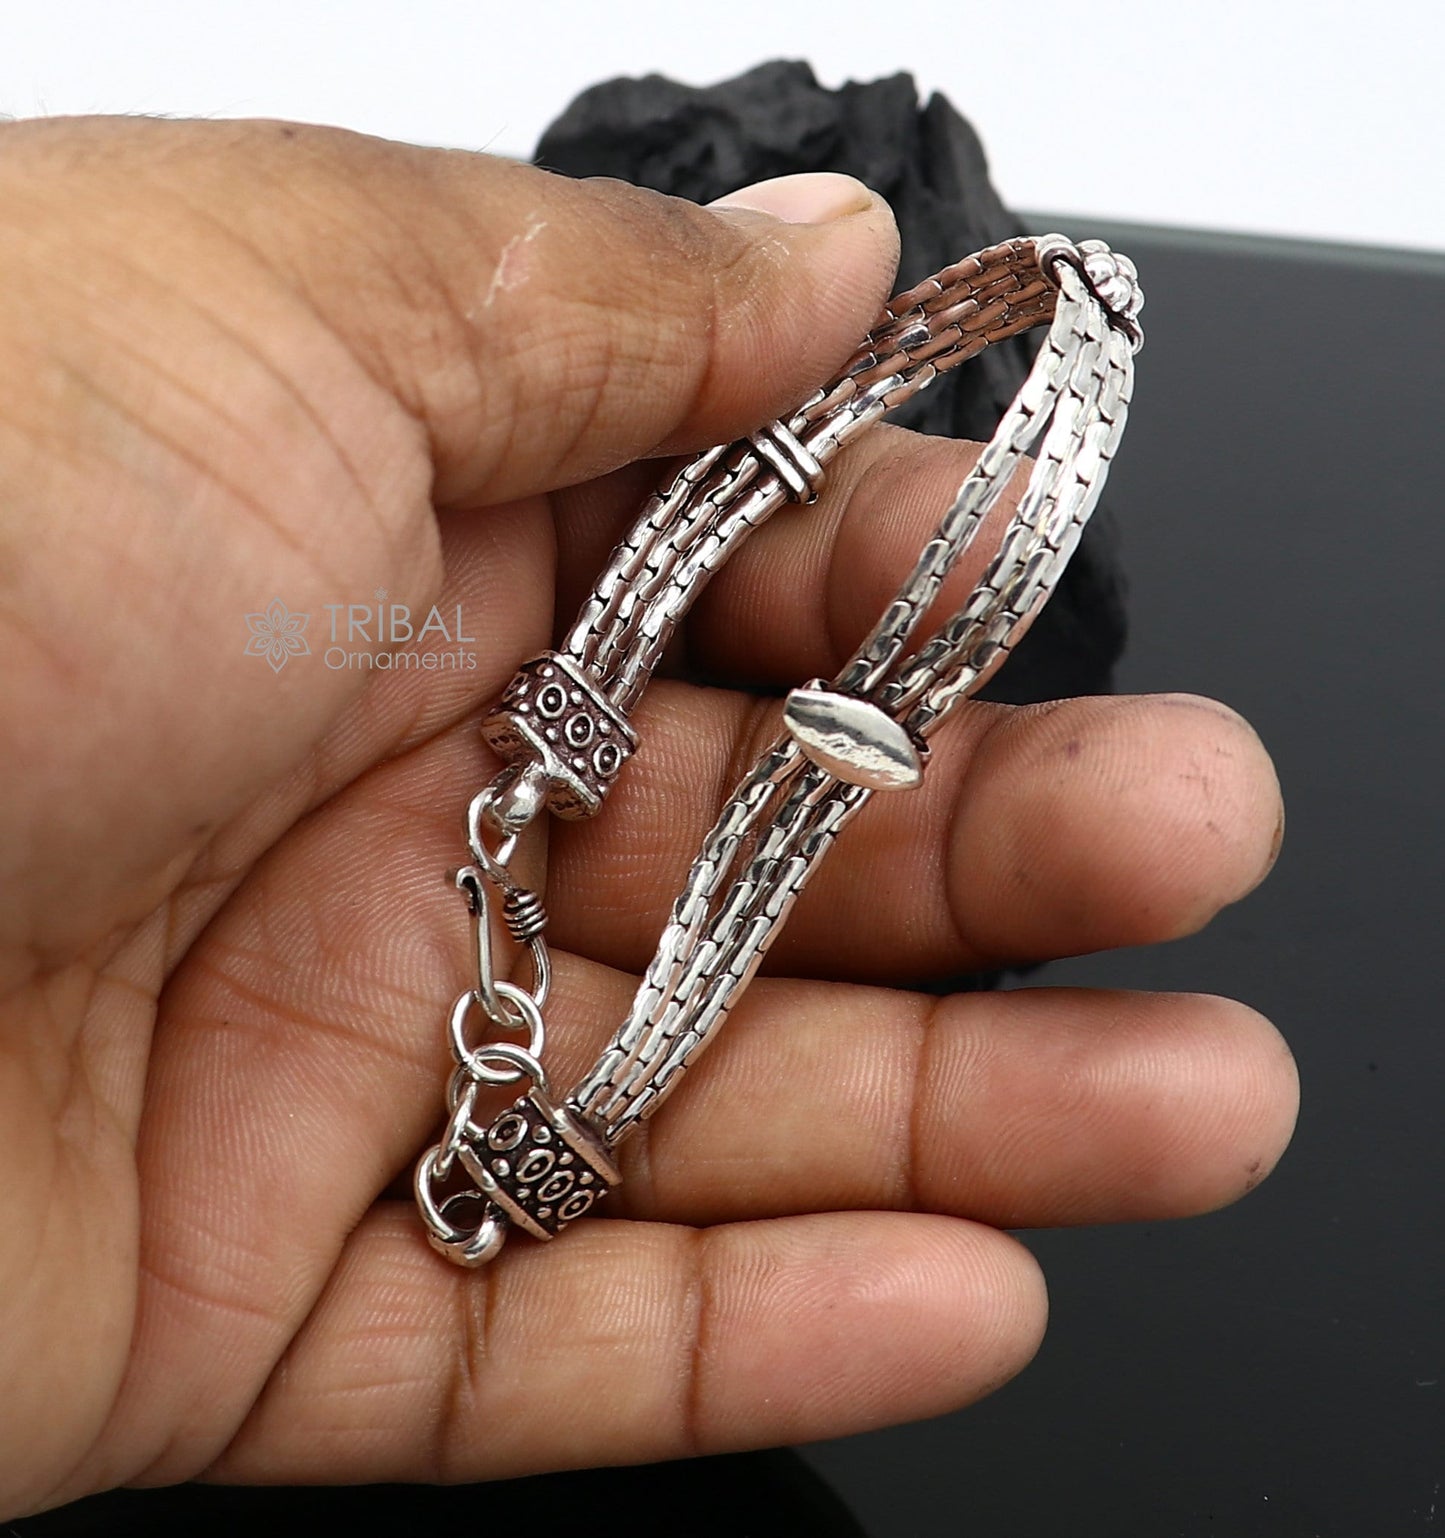 Vintage designer 925 sterling silver handmade 3 line chain 8 inches customized bracelet, Amazing oxidized personalized gift sbr697 - TRIBAL ORNAMENTS